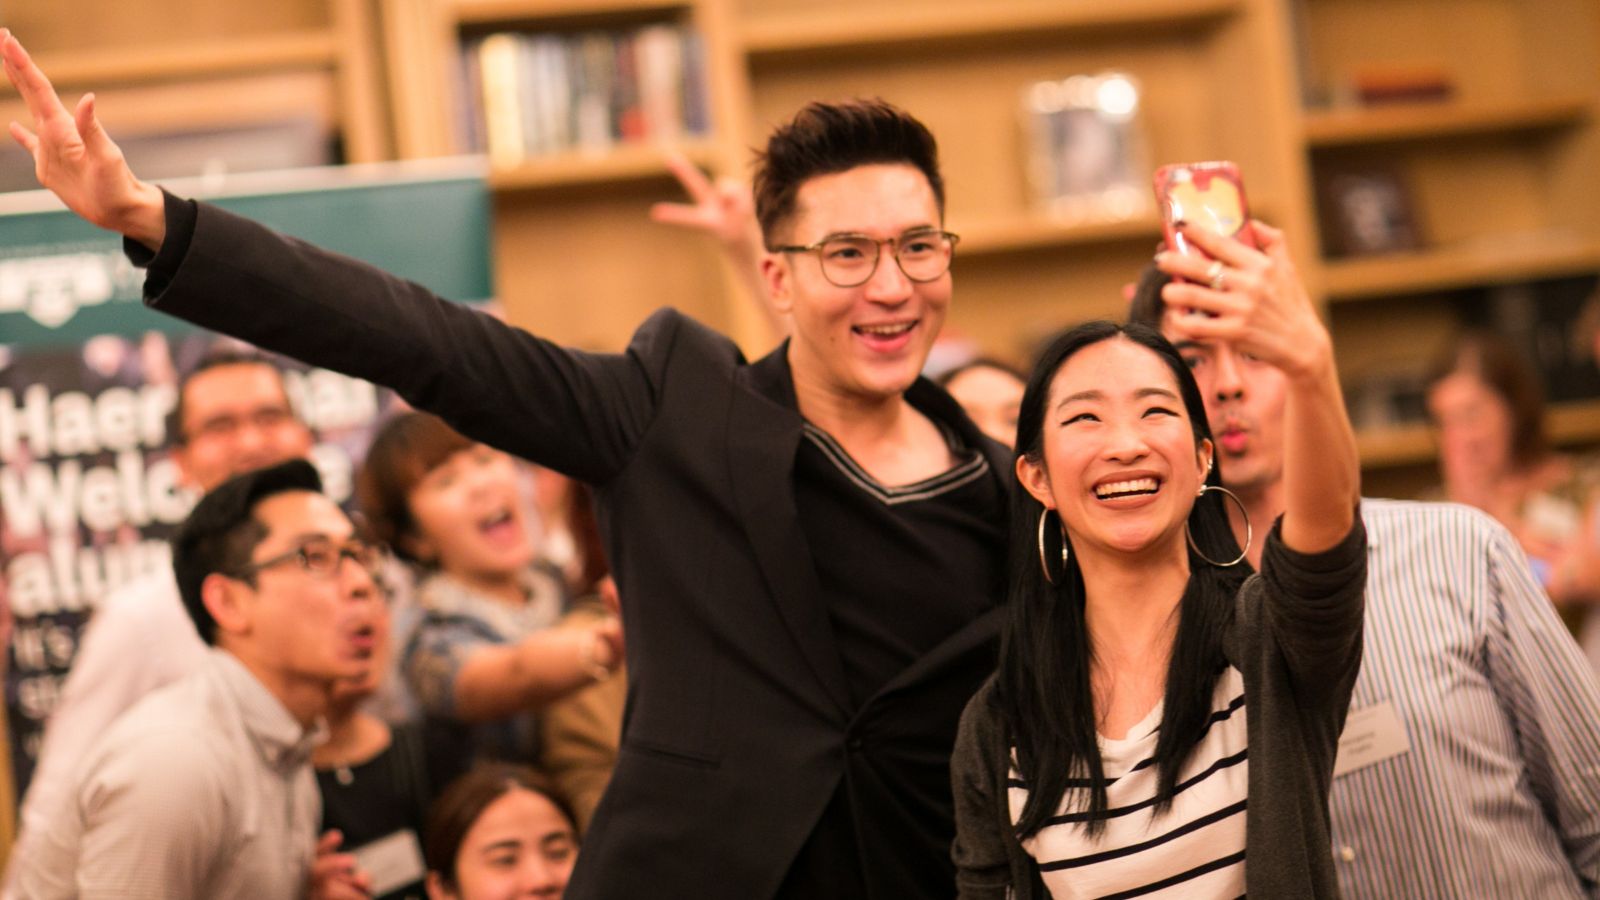 Man and a woman smiling and taking a selfie, with crowd of people posing for the photo in the background.